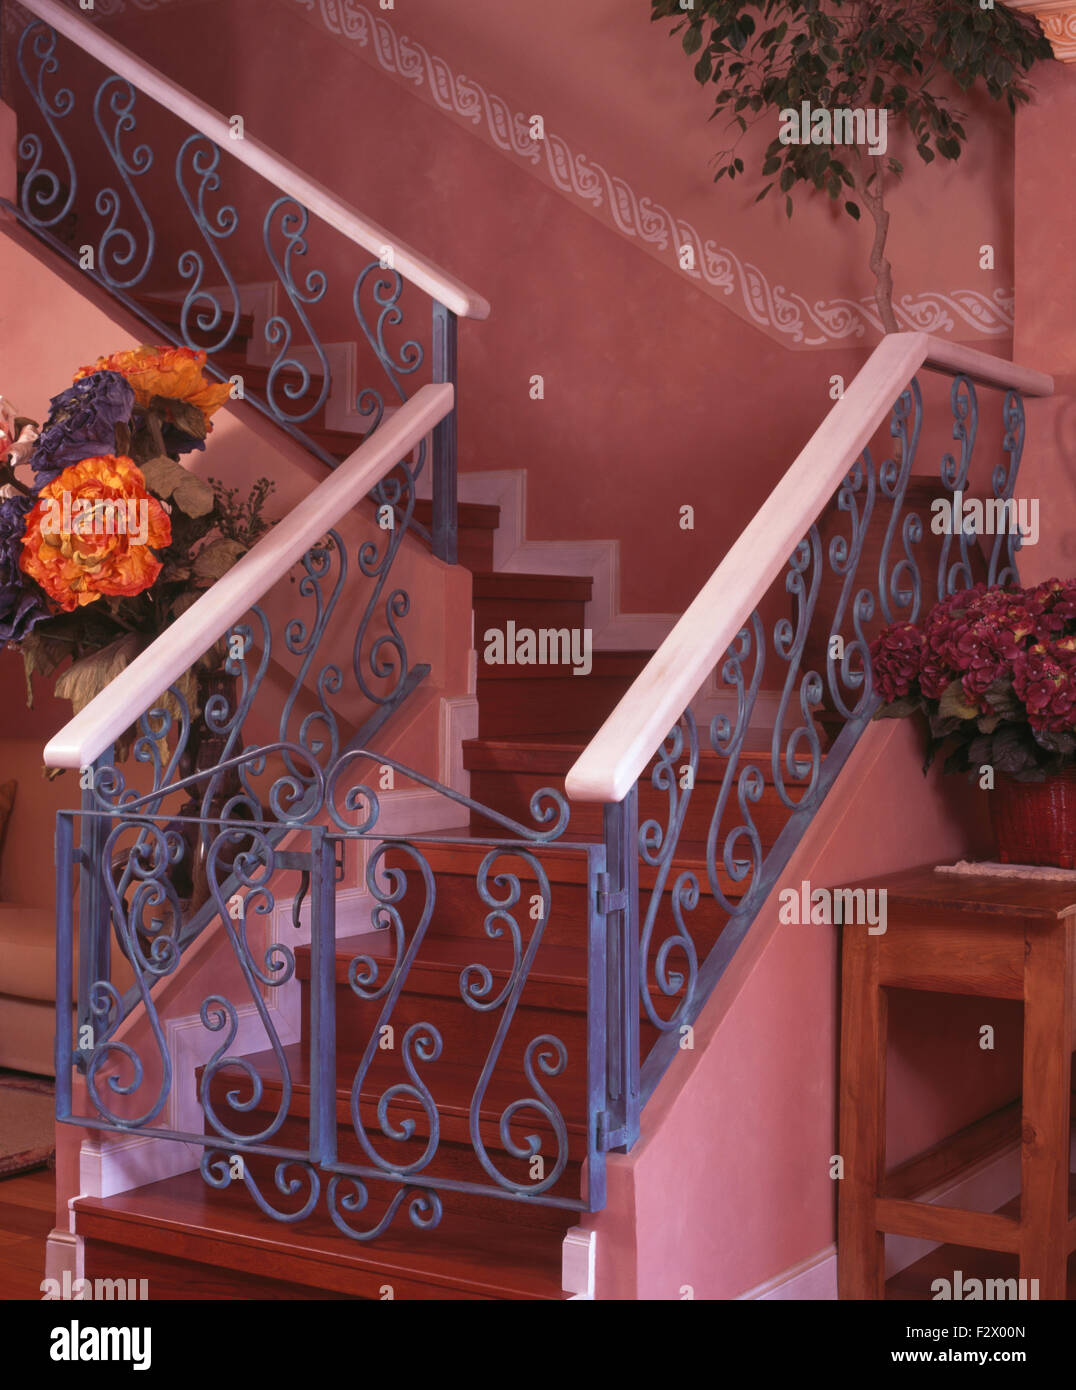 Blue wrought iron banisters and gate on wooden staircase in Spanish hall Stock Photo